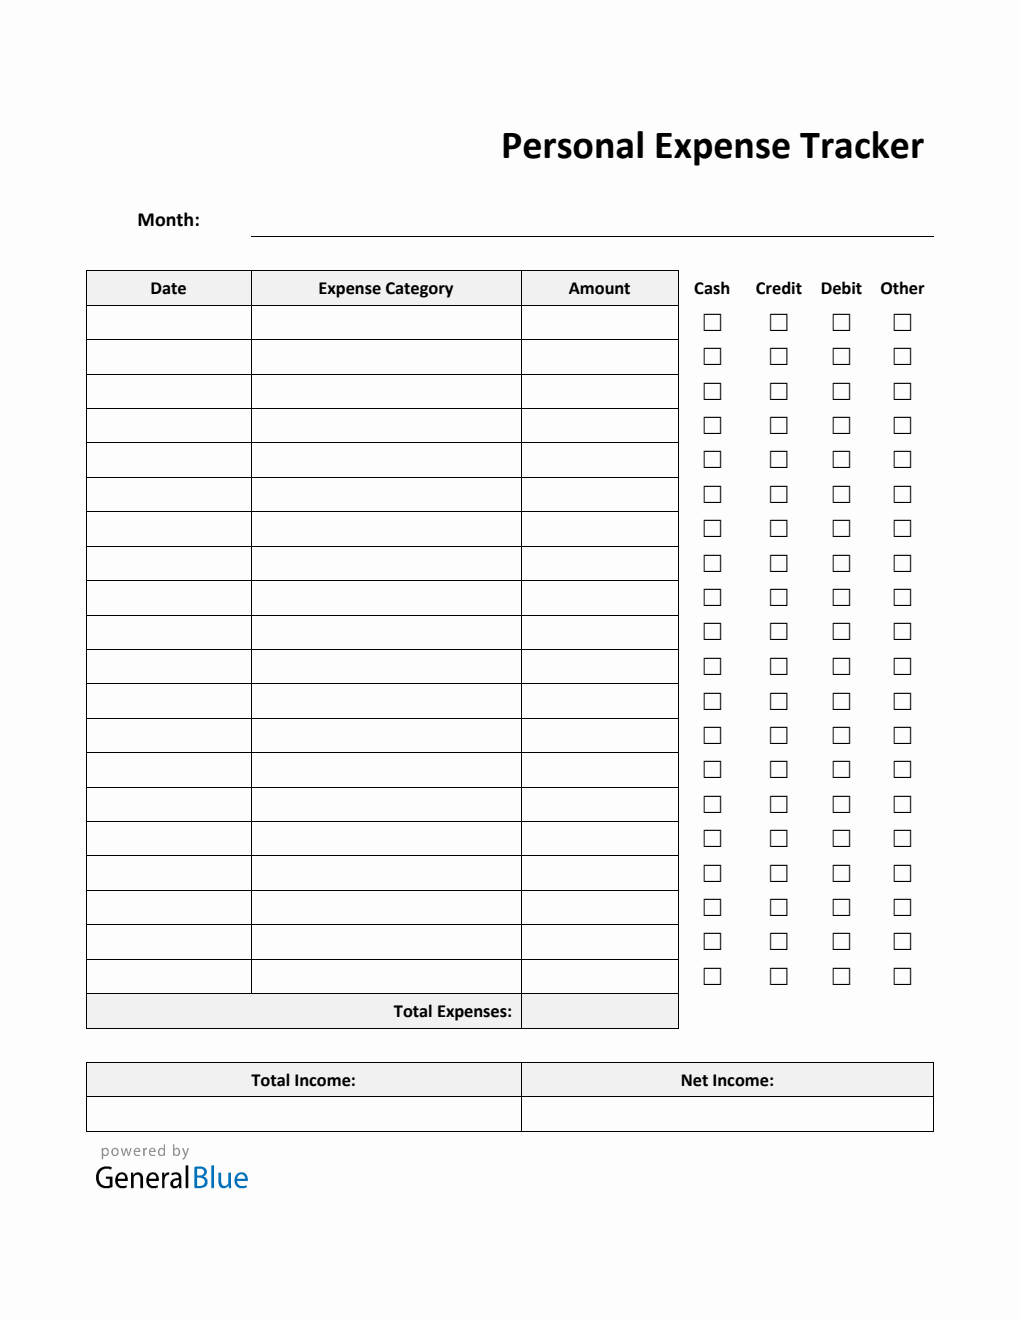 Personal Expense Tracker in PDF (Simple)